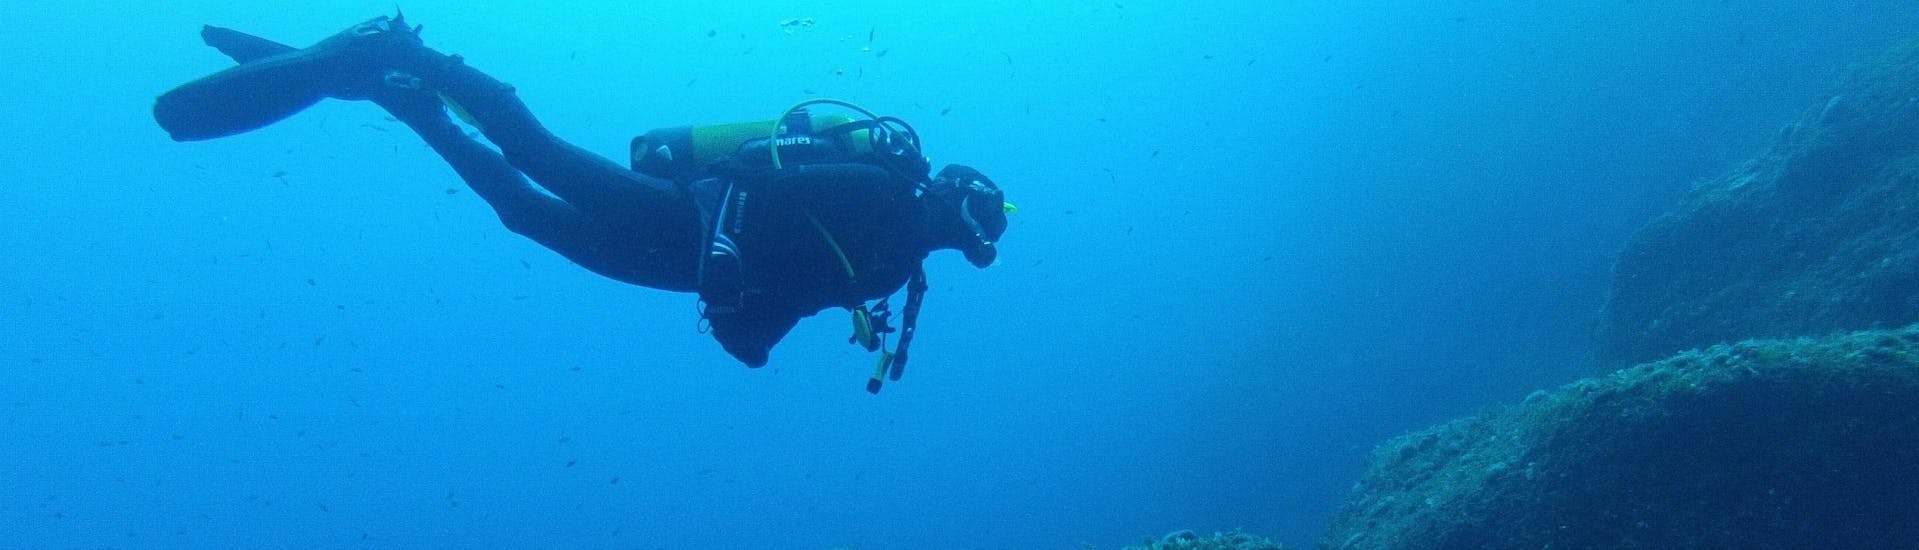 PADI Open Water Diver Course in Gozo for Beginners.